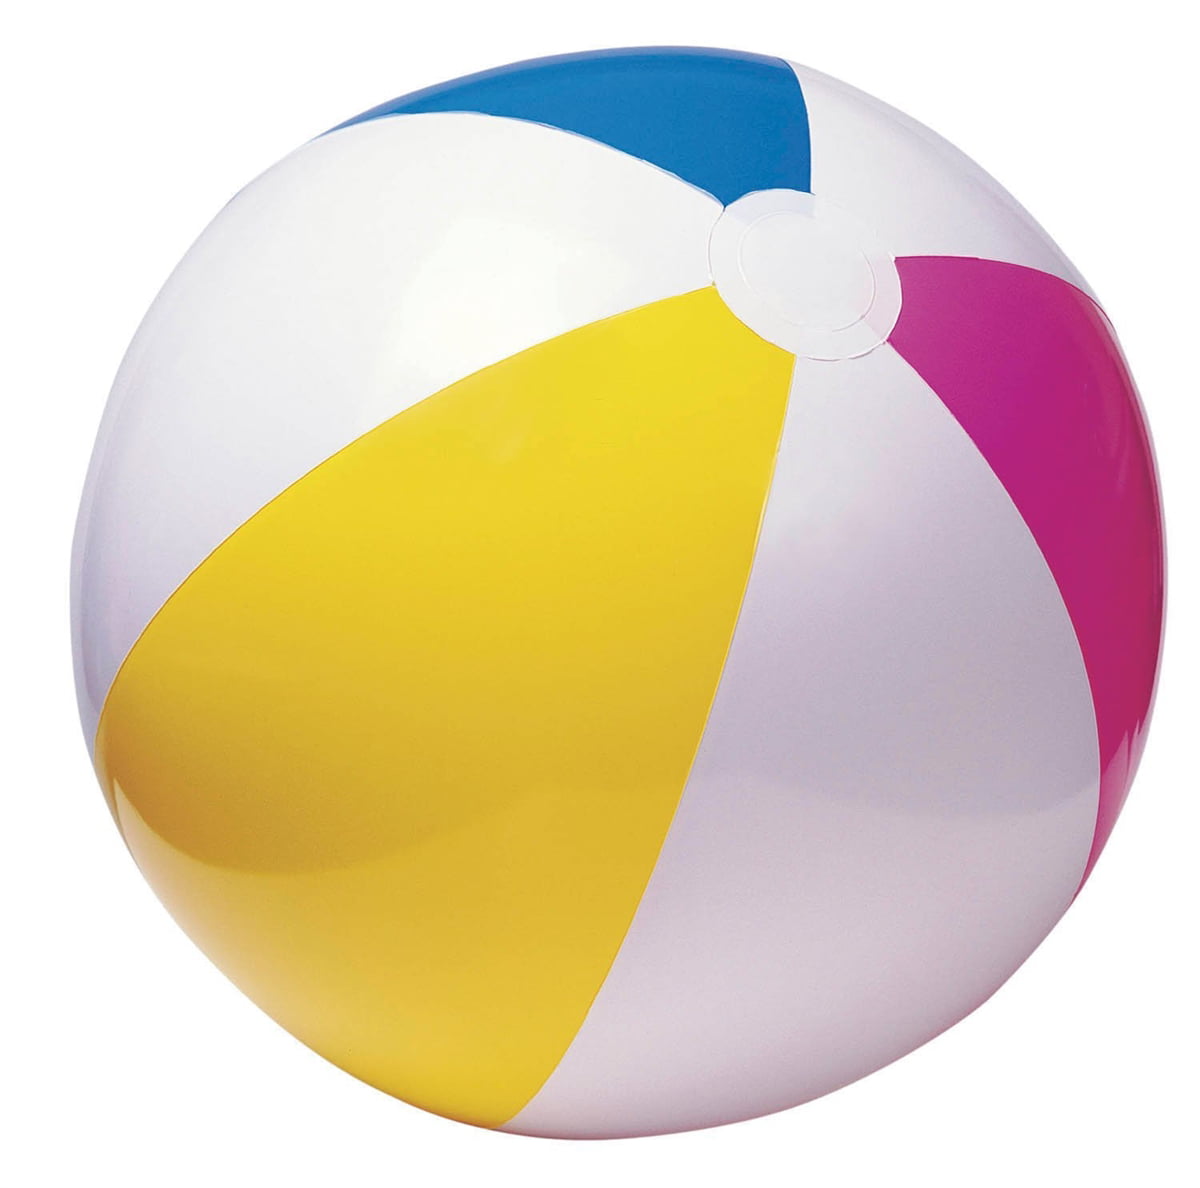 Intex Jumbo Inflatable Glossy Big Panel Colorful Giant Beach Ball 42 #59065 Color May Vary for sale online 